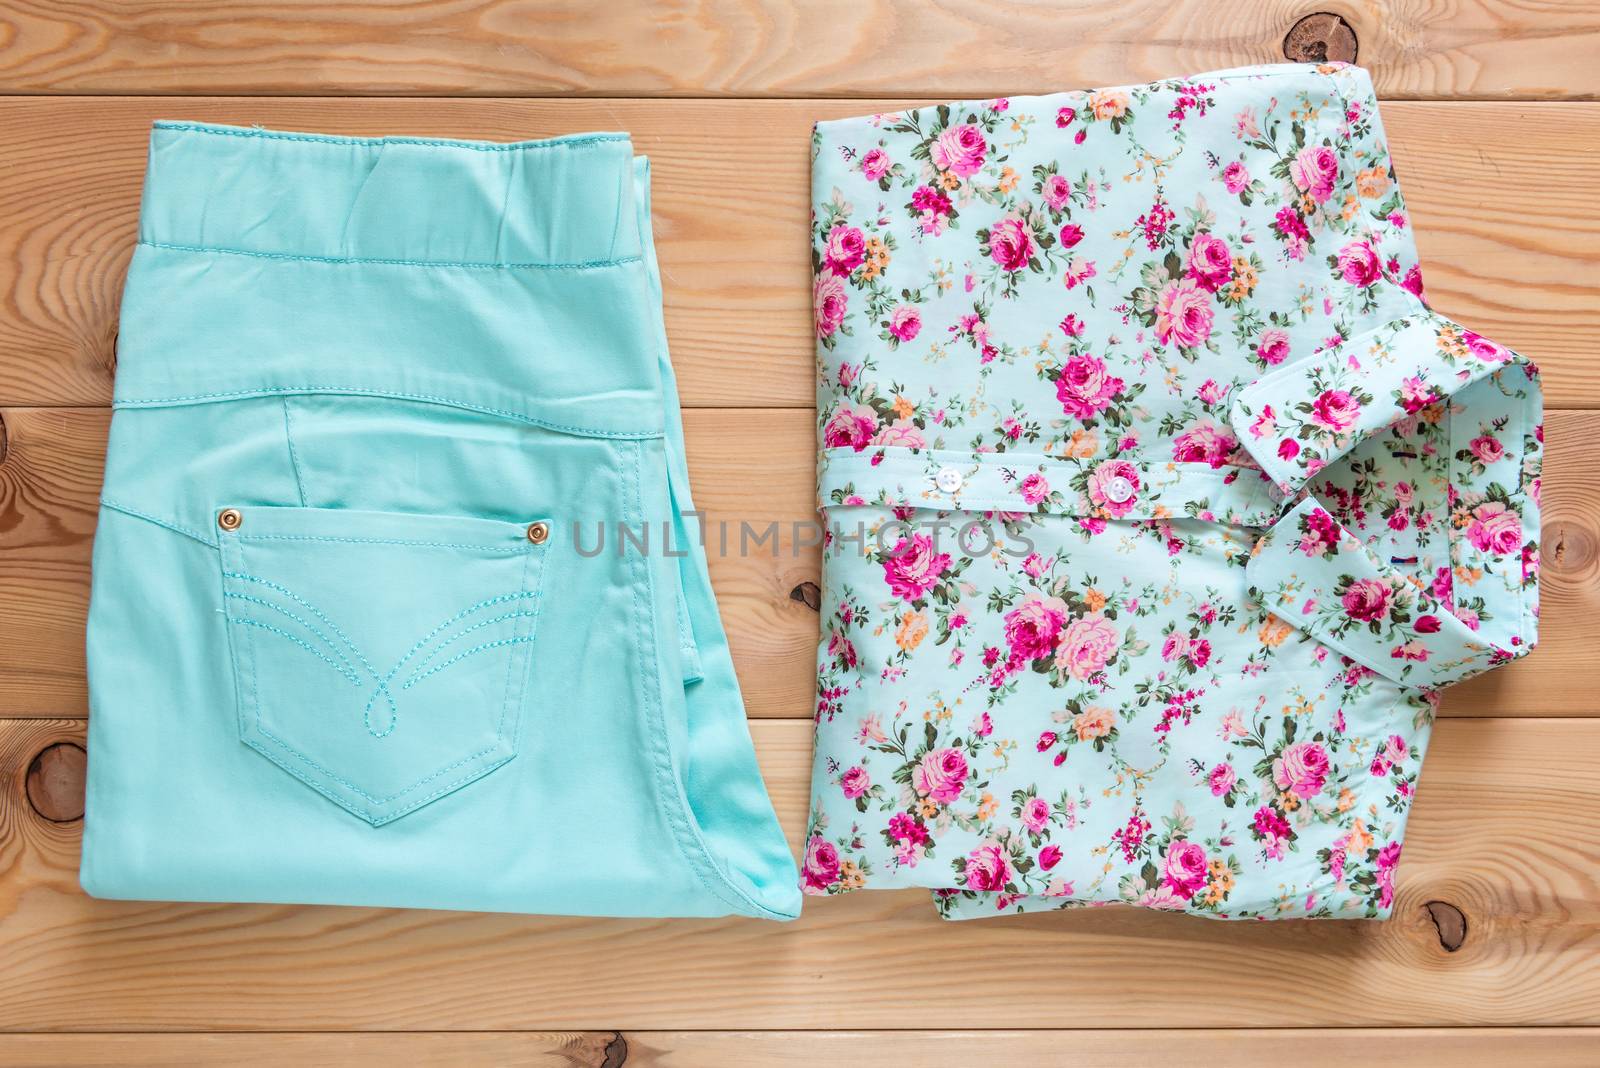 beautiful shirt with floral print and turquoise trousers on the by kosmsos111